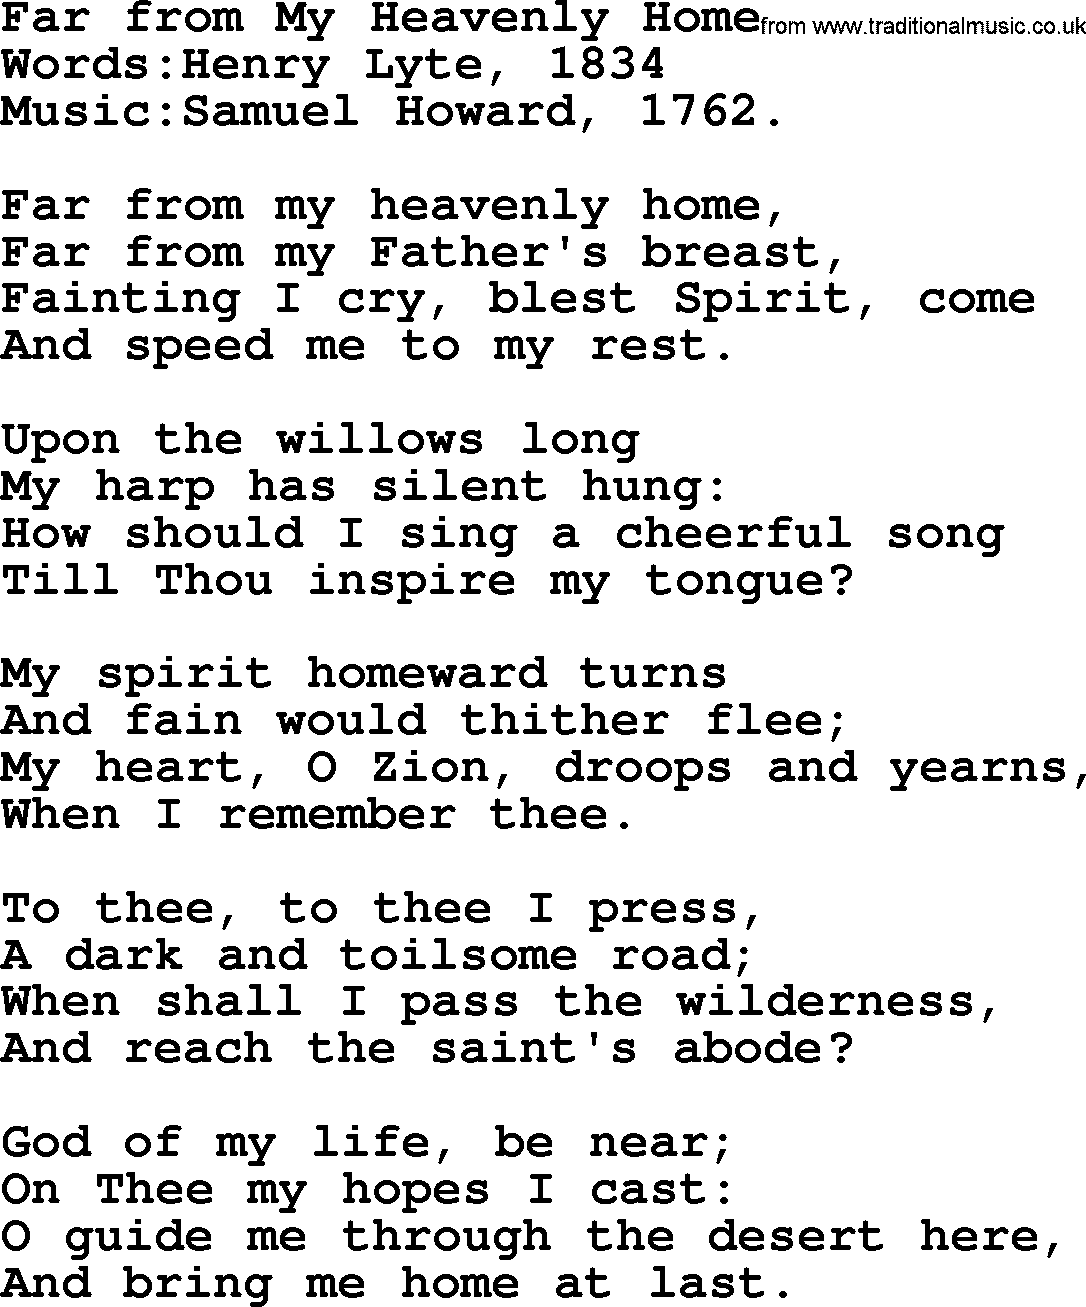 Songs and Hymns about Heaven: Far From My Heavenly Home lyrics with PDF